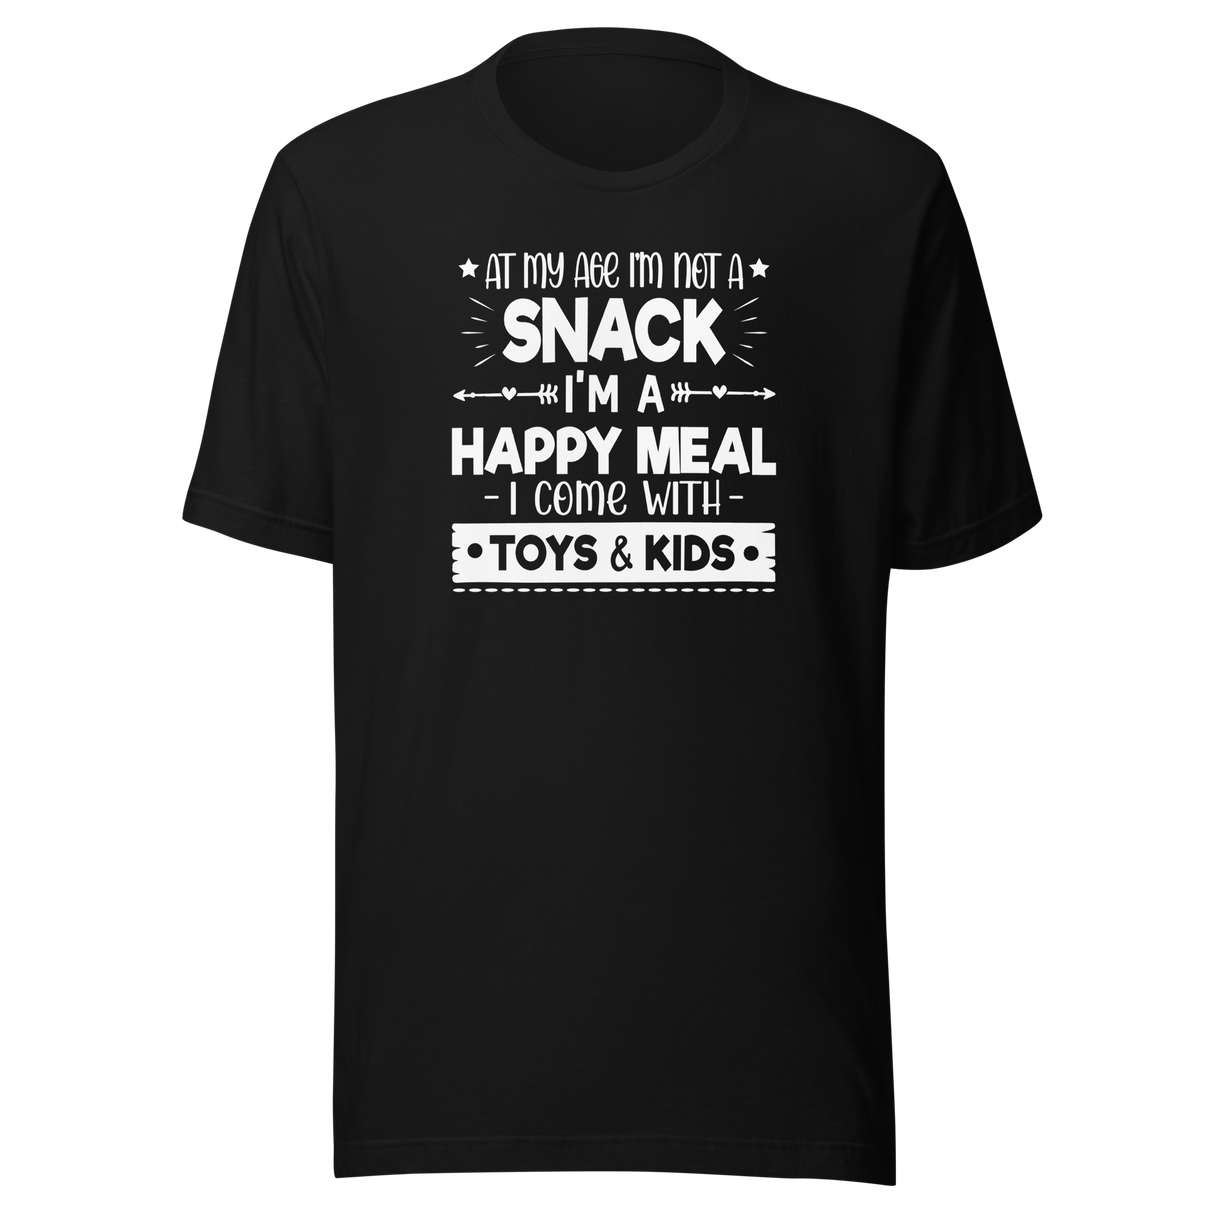 at-my-age-im-not-a-snack-im-a-happy-meal-i-come-with-toys-and-kids-food-tee-mom-t-shirt-funny-tee-sassy-t-shirt-bold-tee#color_black